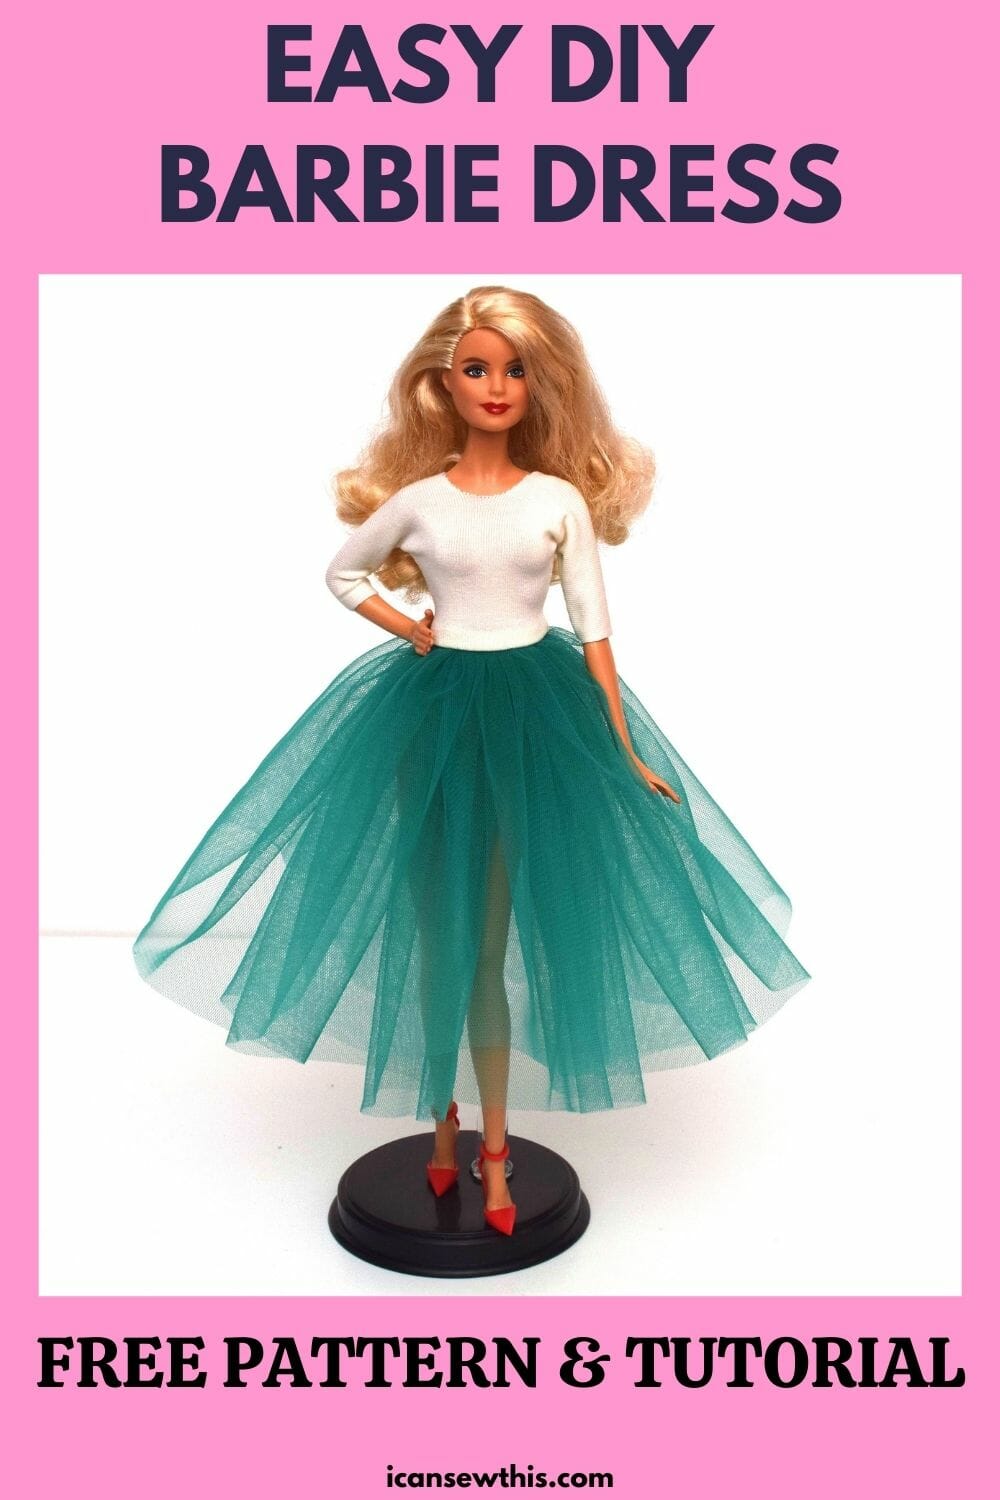 5 Easy and Beautiful DIY Barbie Doll Dresses